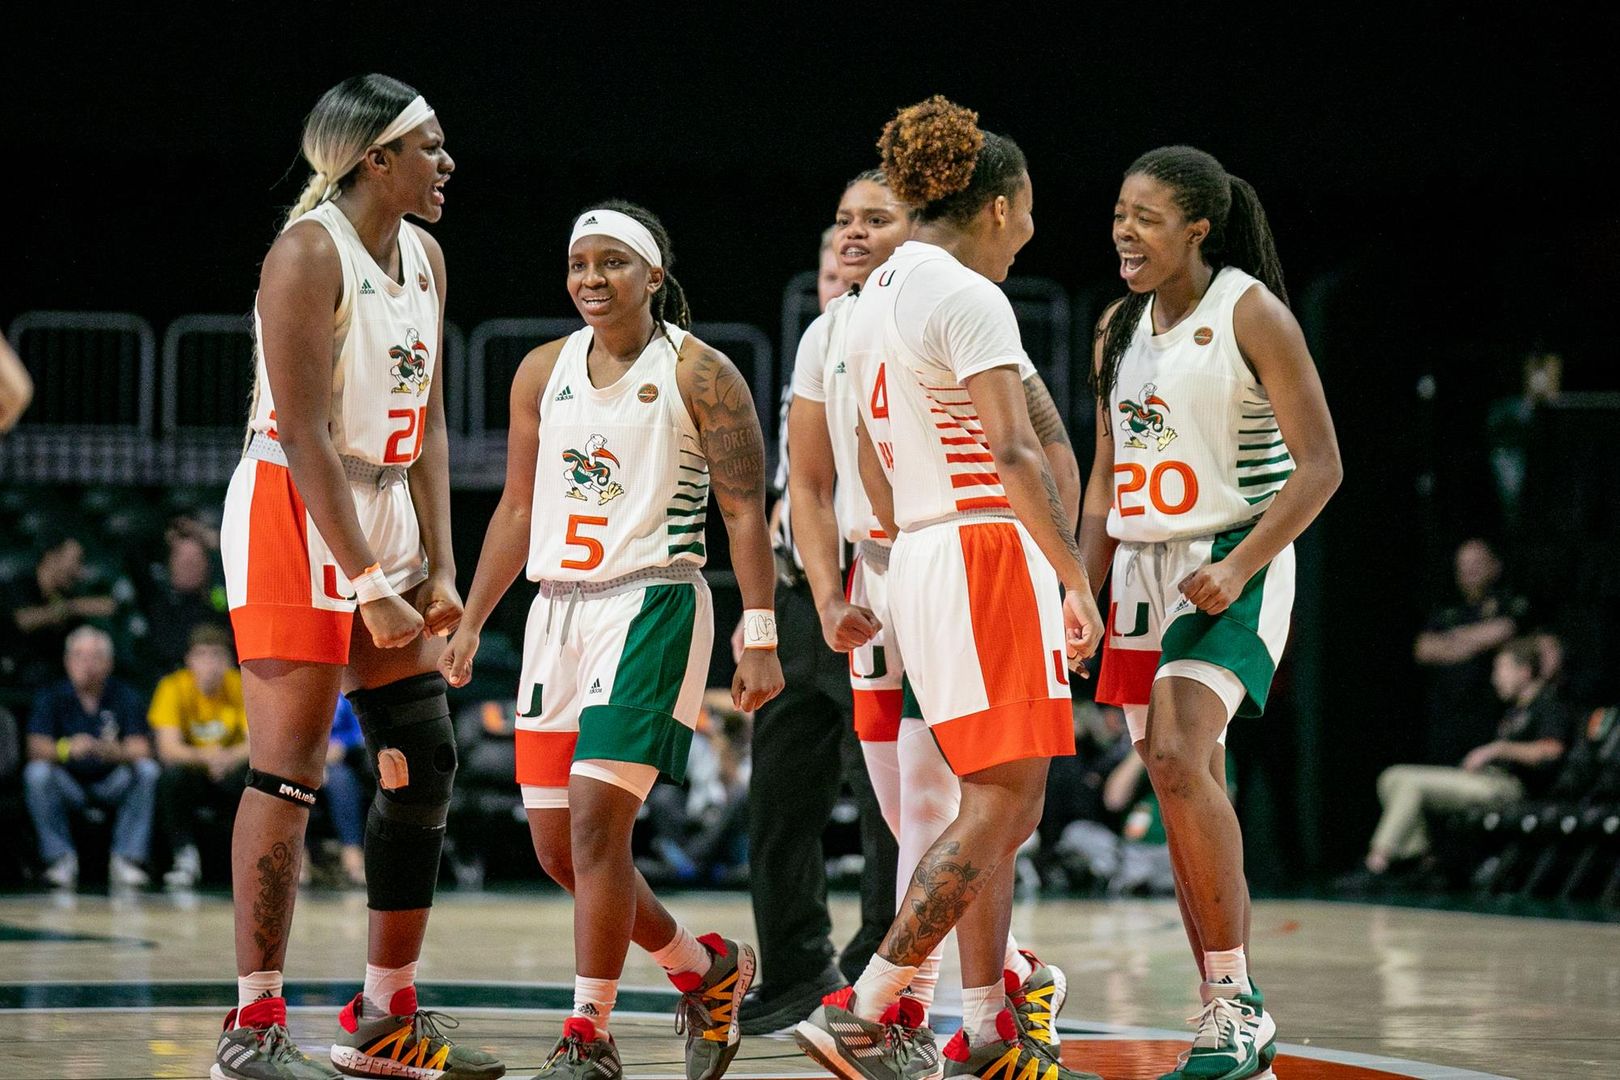 Canes Look to Rebound at Boston College